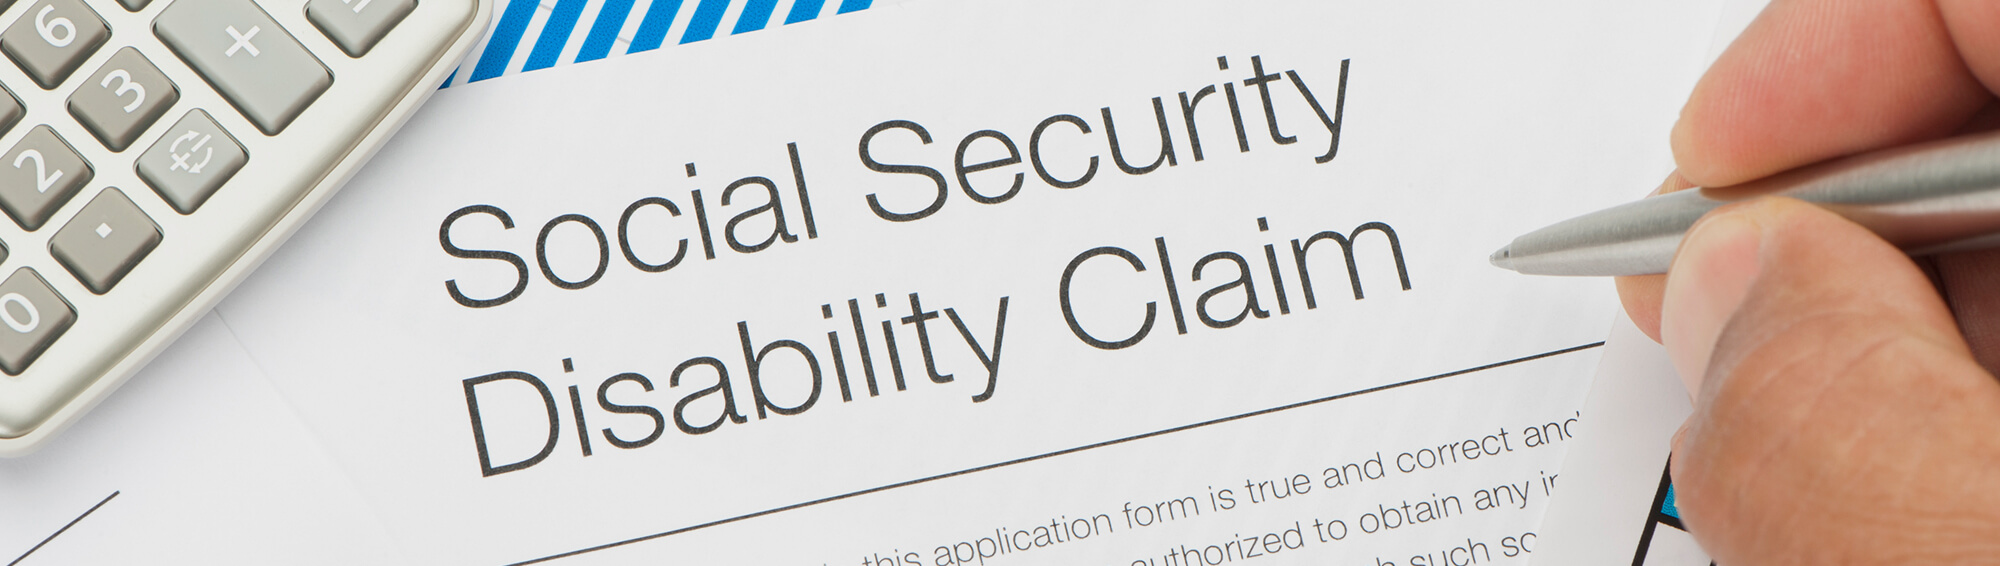 New Bill Would Allow Terminally Ill Patients to Get Social Security Disability Benefits Immediately